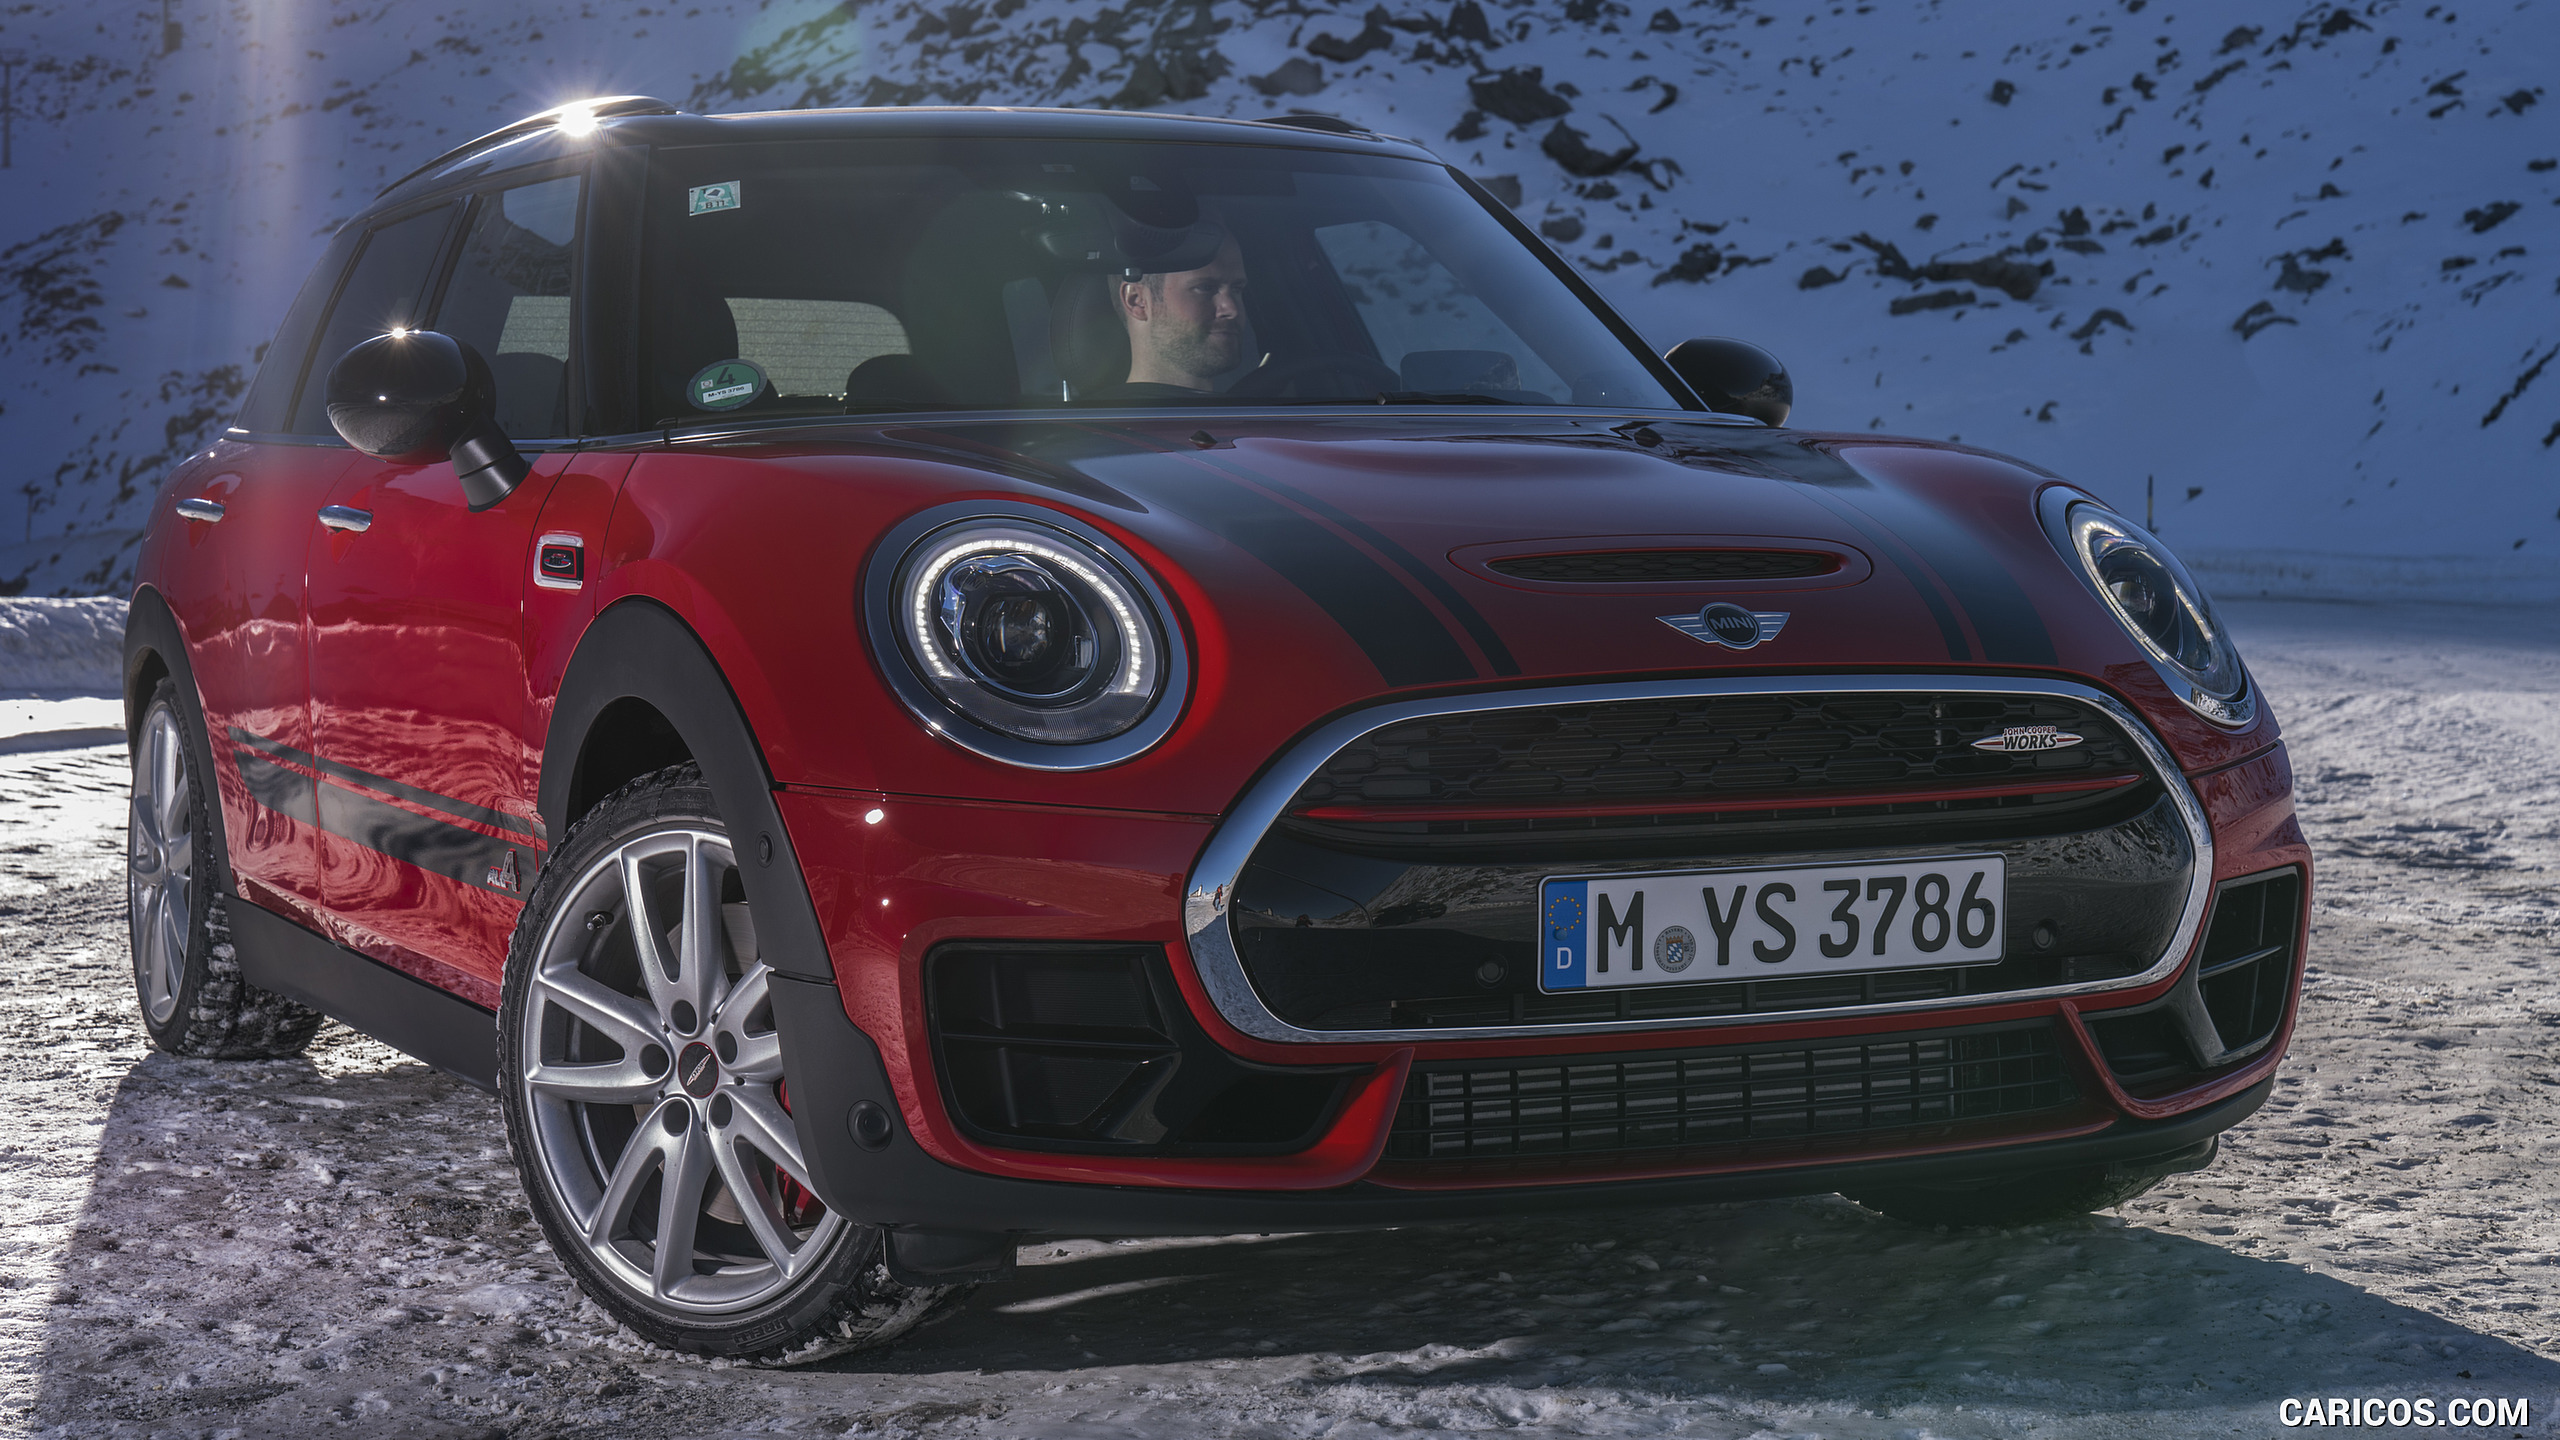 2017 MINI Clubman John Cooper Works in Snow - Front, #46 of 72